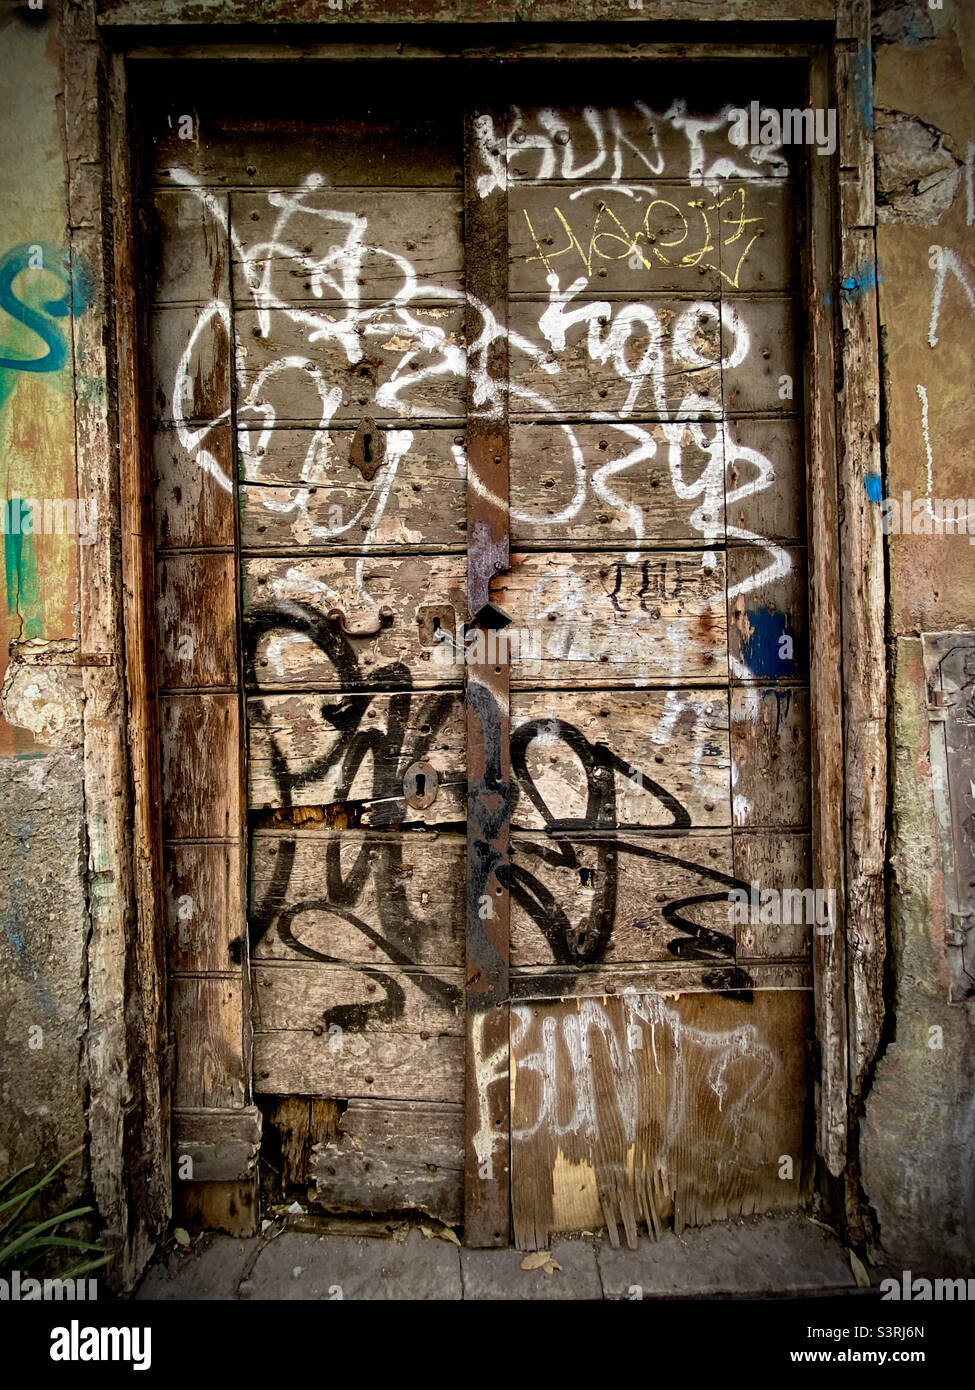 Graffitied wooden doorway in an abandoned building Stock Photo